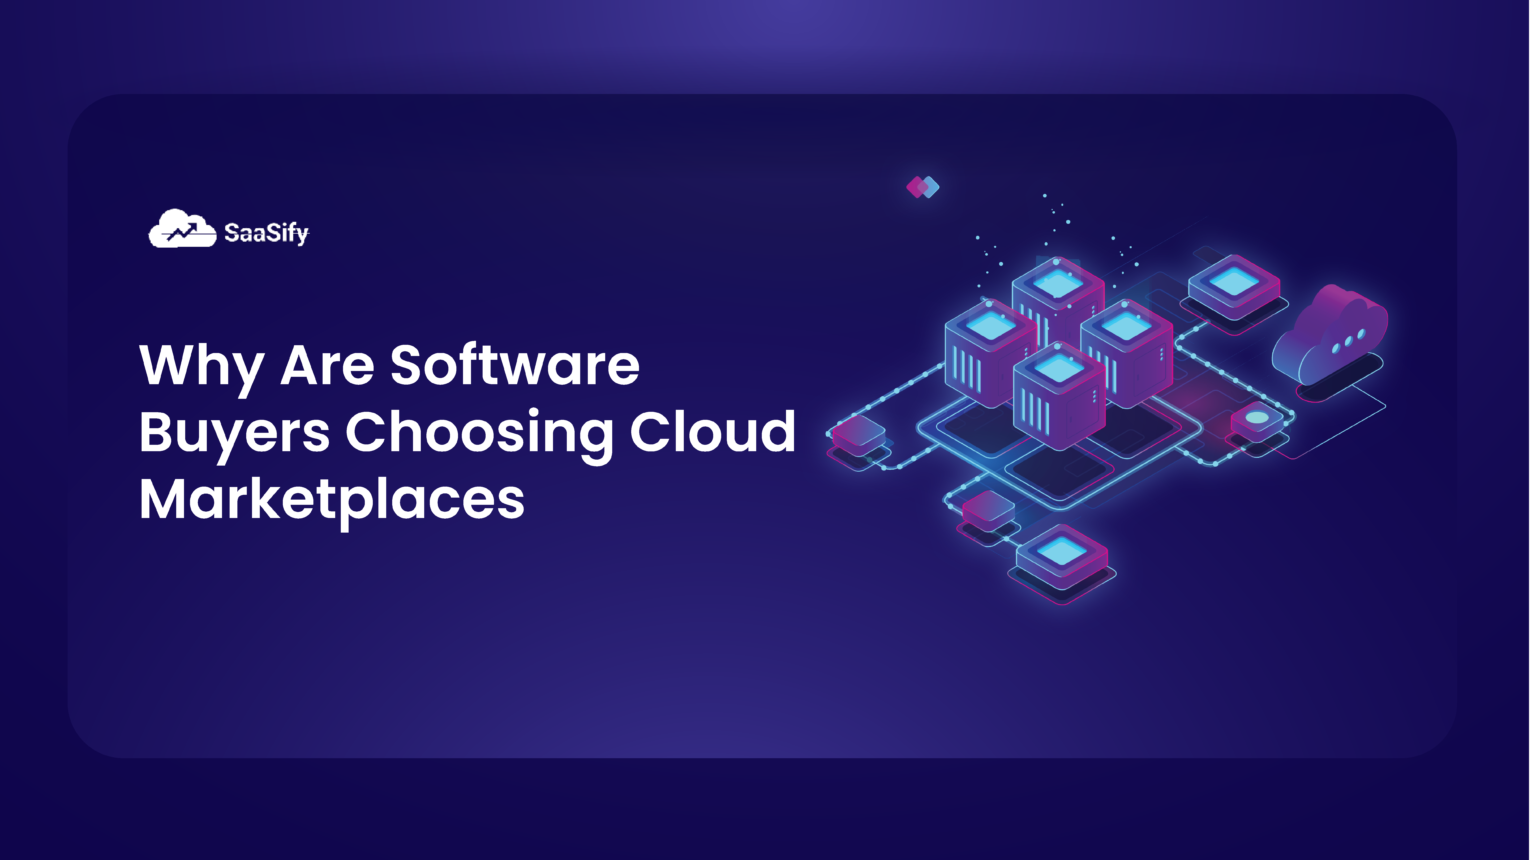 Why Are Software Buyers Choosing Cloud Marketplaces